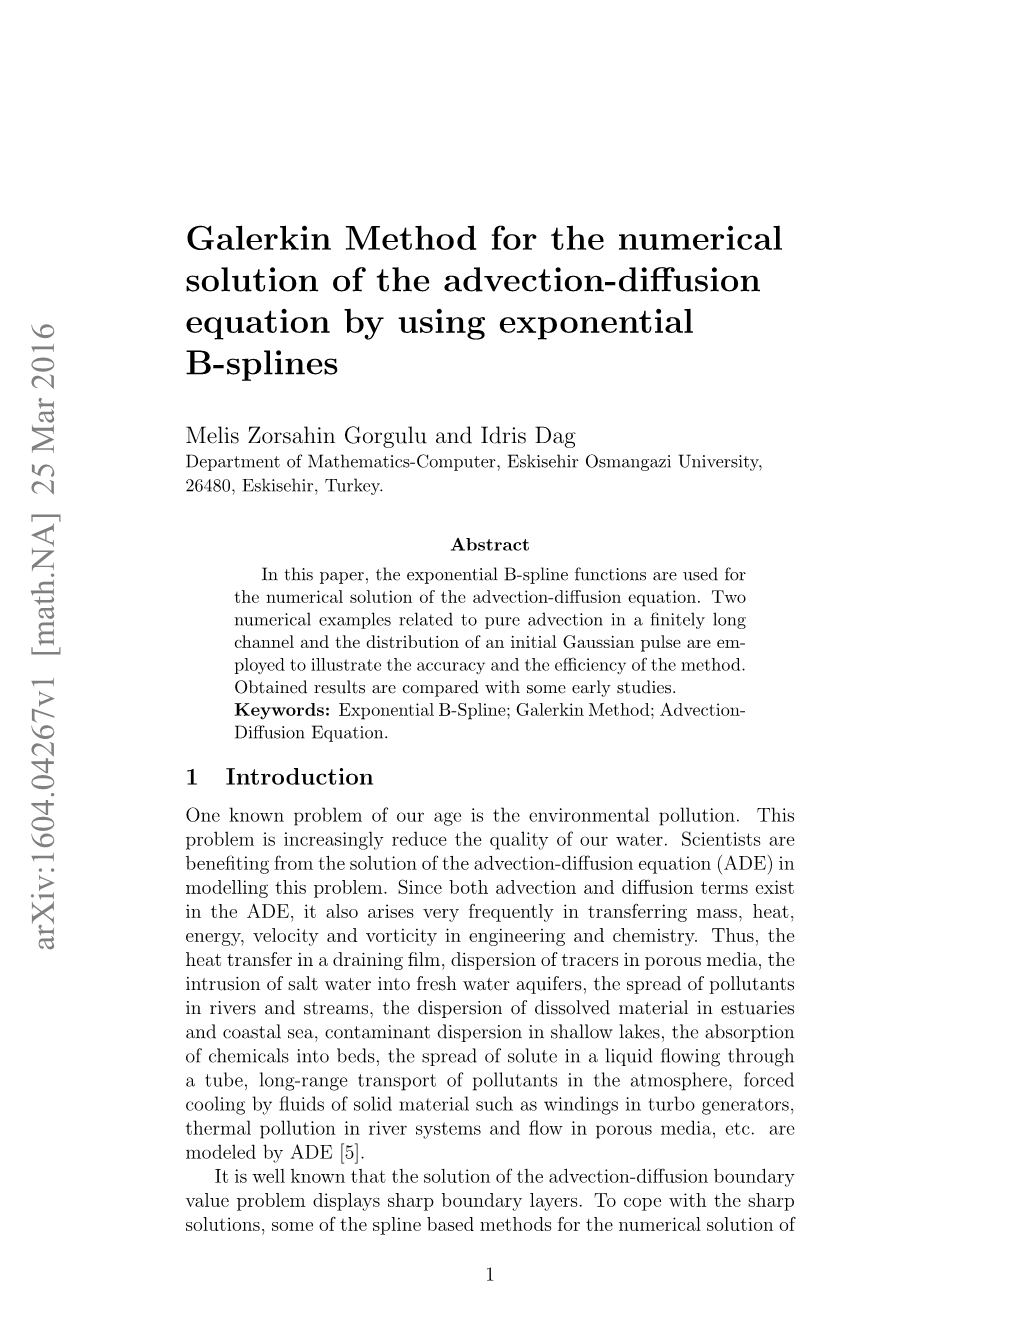 Galerkin Method for the Numerical Solution of the Advection-Diffusion